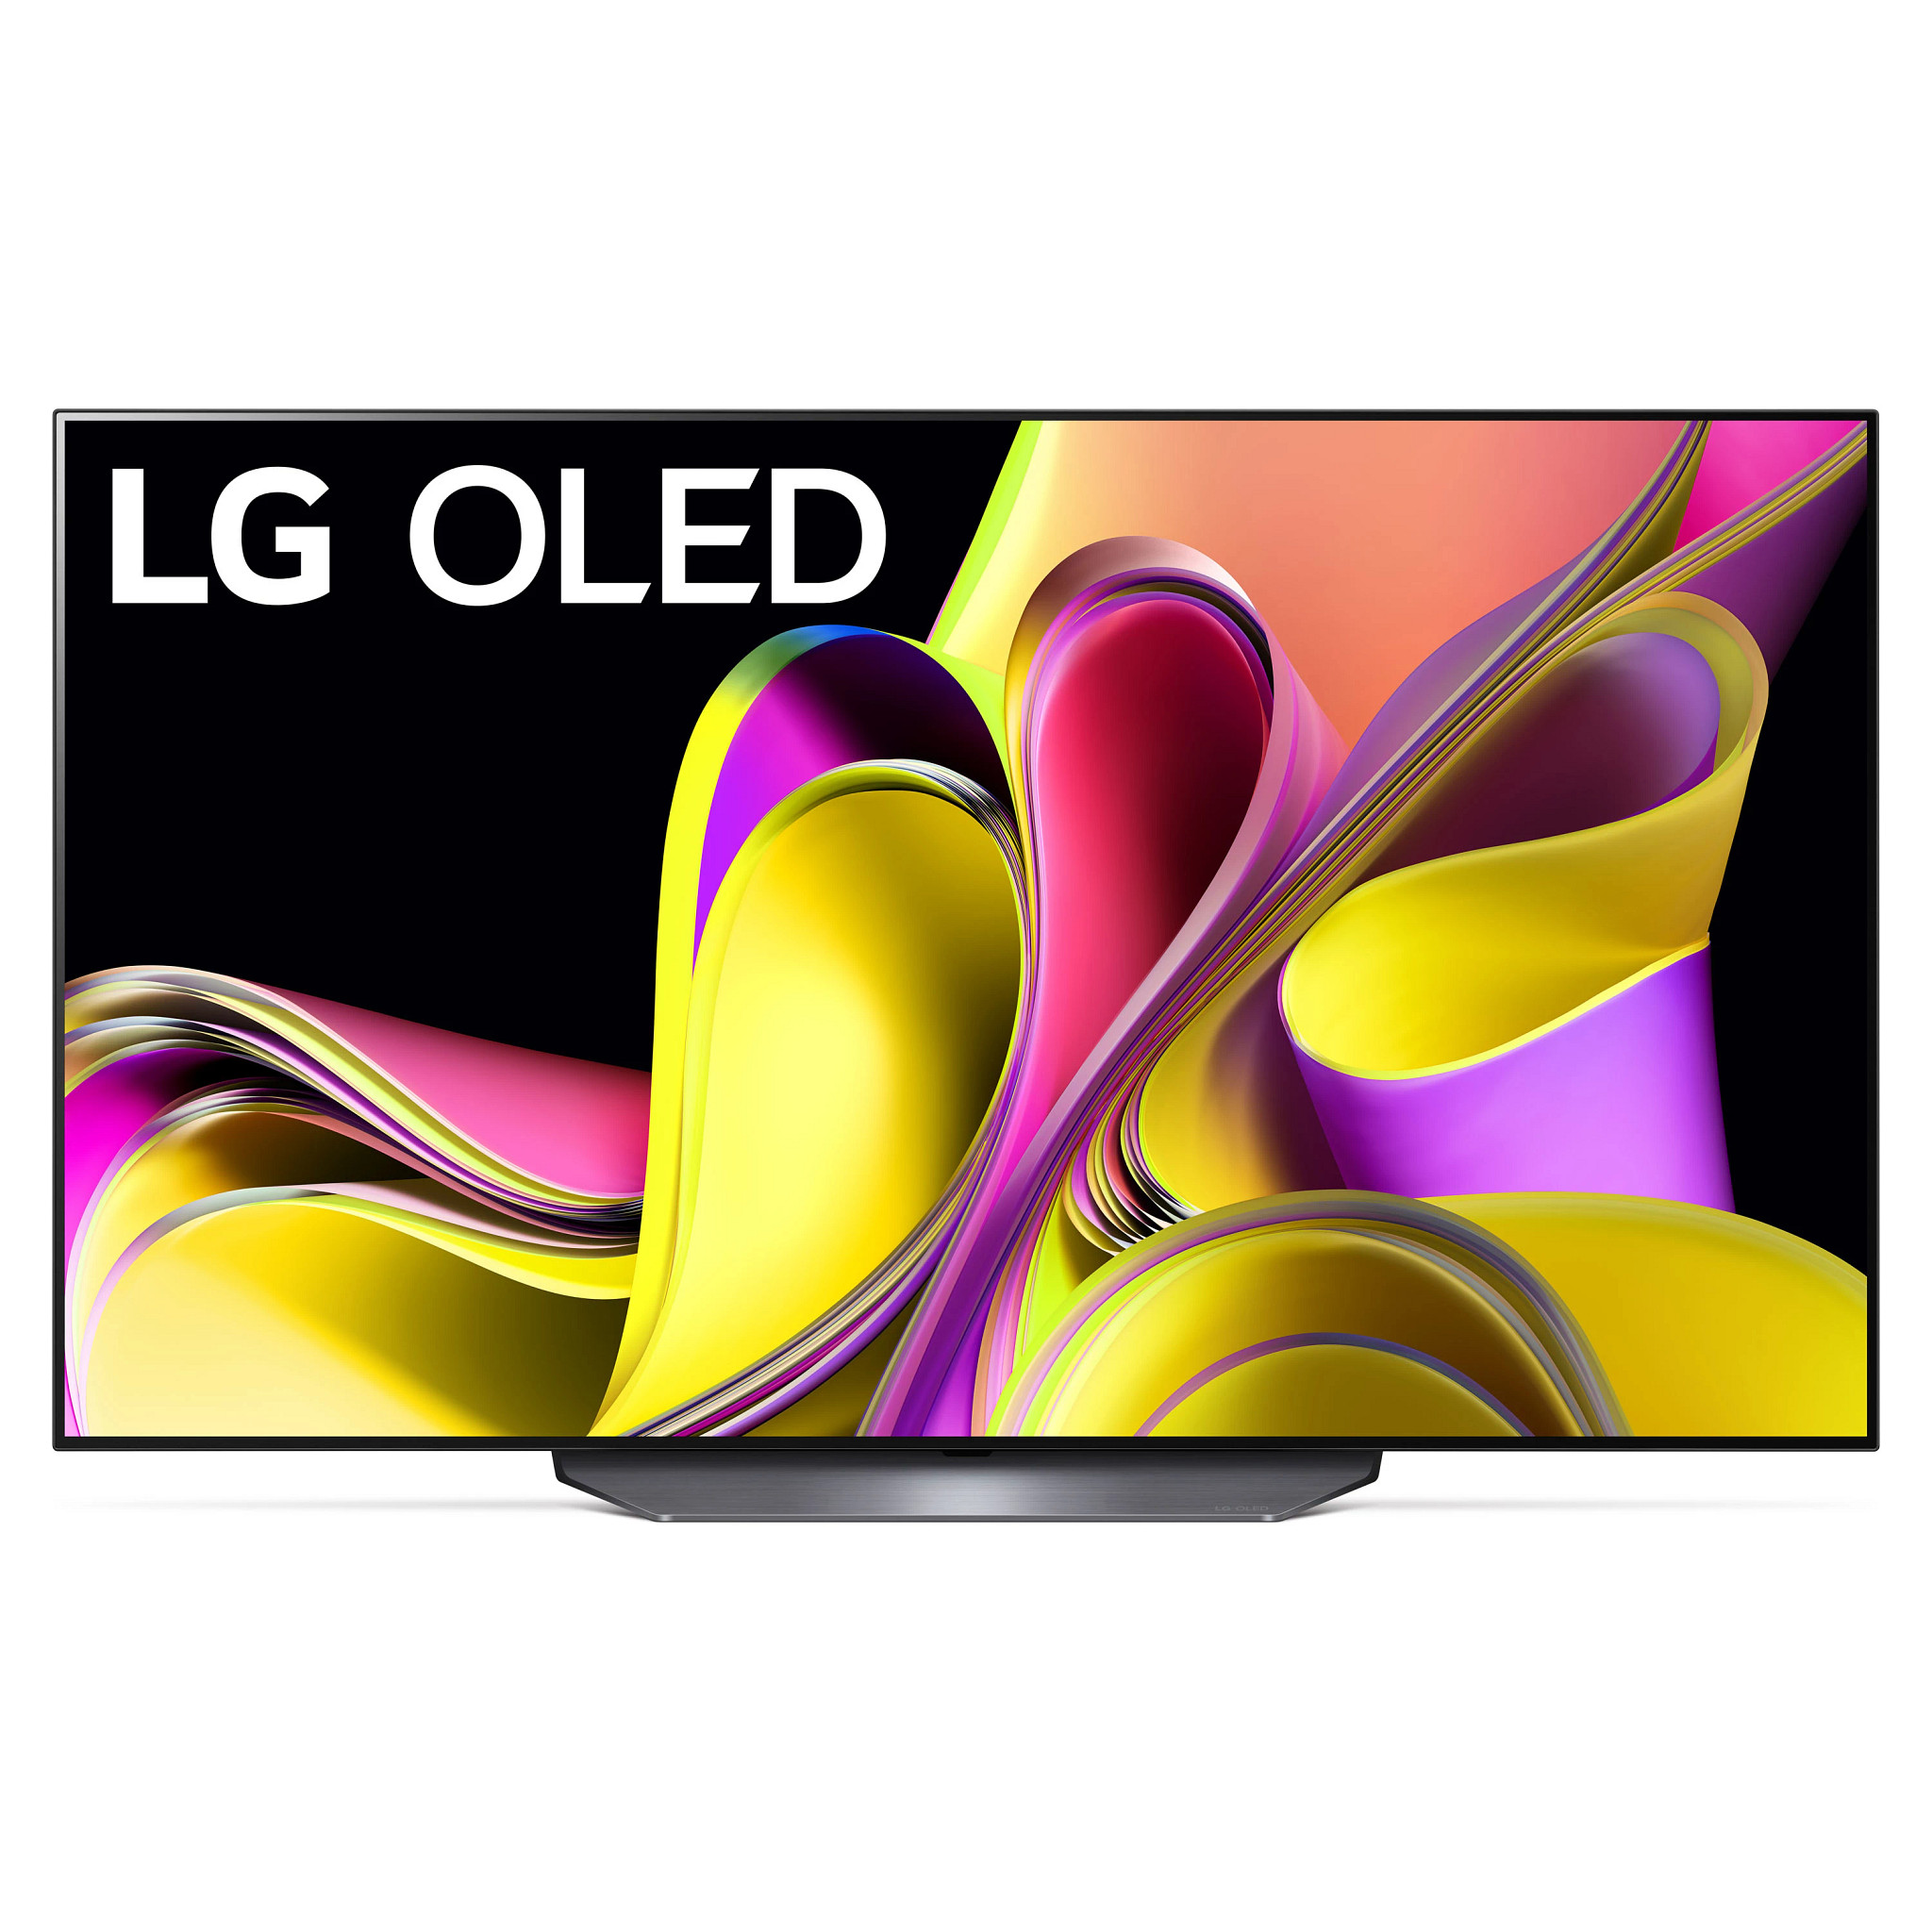 LG 55" Class 4K UHD OLED Web OS Smart TV with Dolby Vision B2 Series - OLED55B3PUA - image 1 of 17